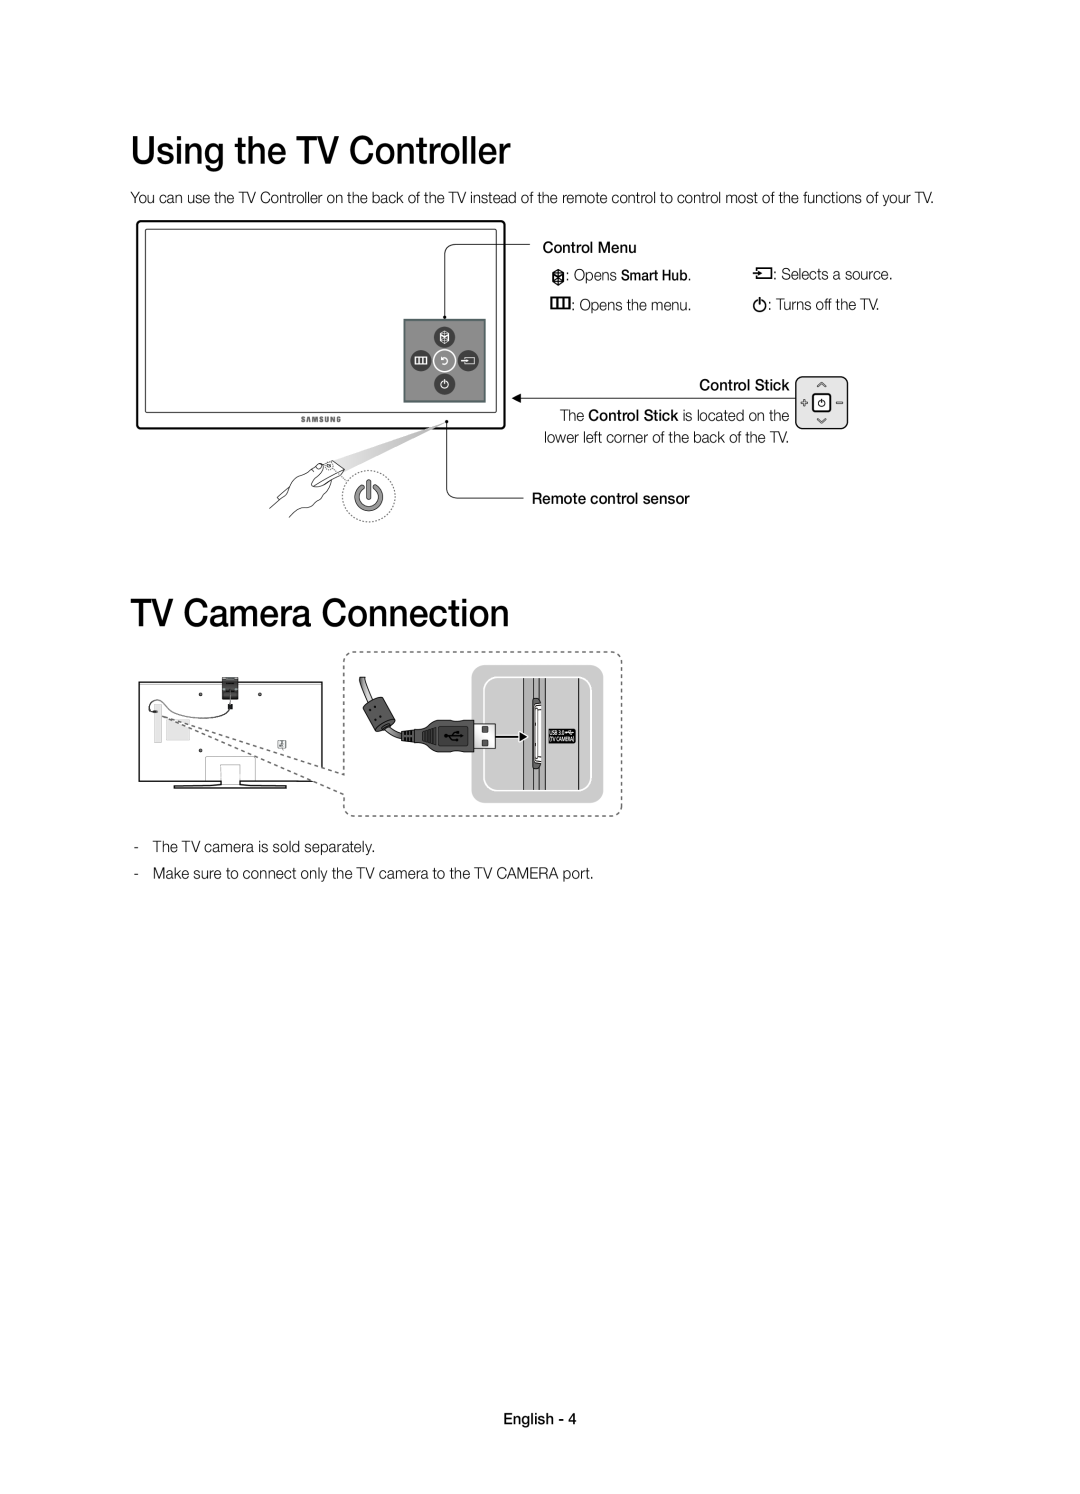 Samsung UE65JU7500TXZT, UE48JU7500TXXC Using the TV Controller, TV Camera Connection, Selects a source. Turns off the TV 